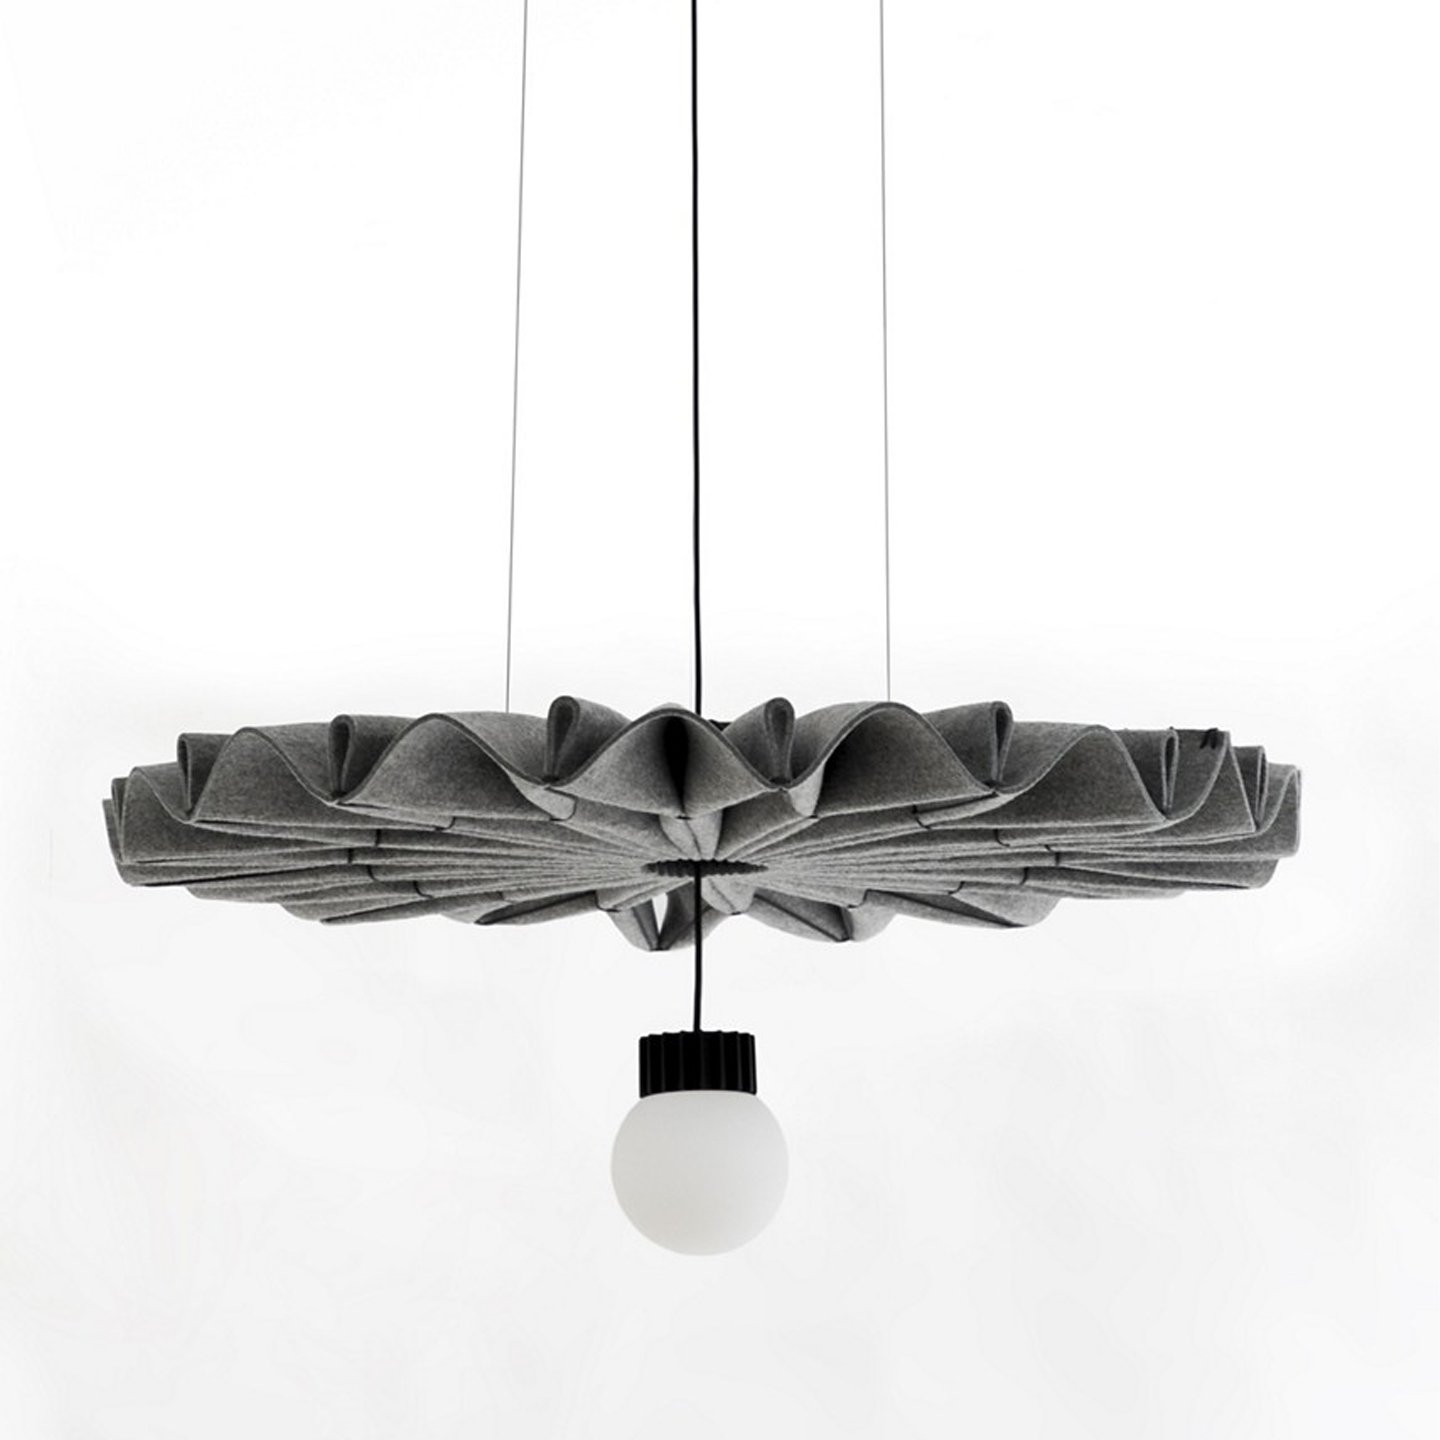 Haworth BuzziPleat LED Lighting with light hanging down from grey cloth